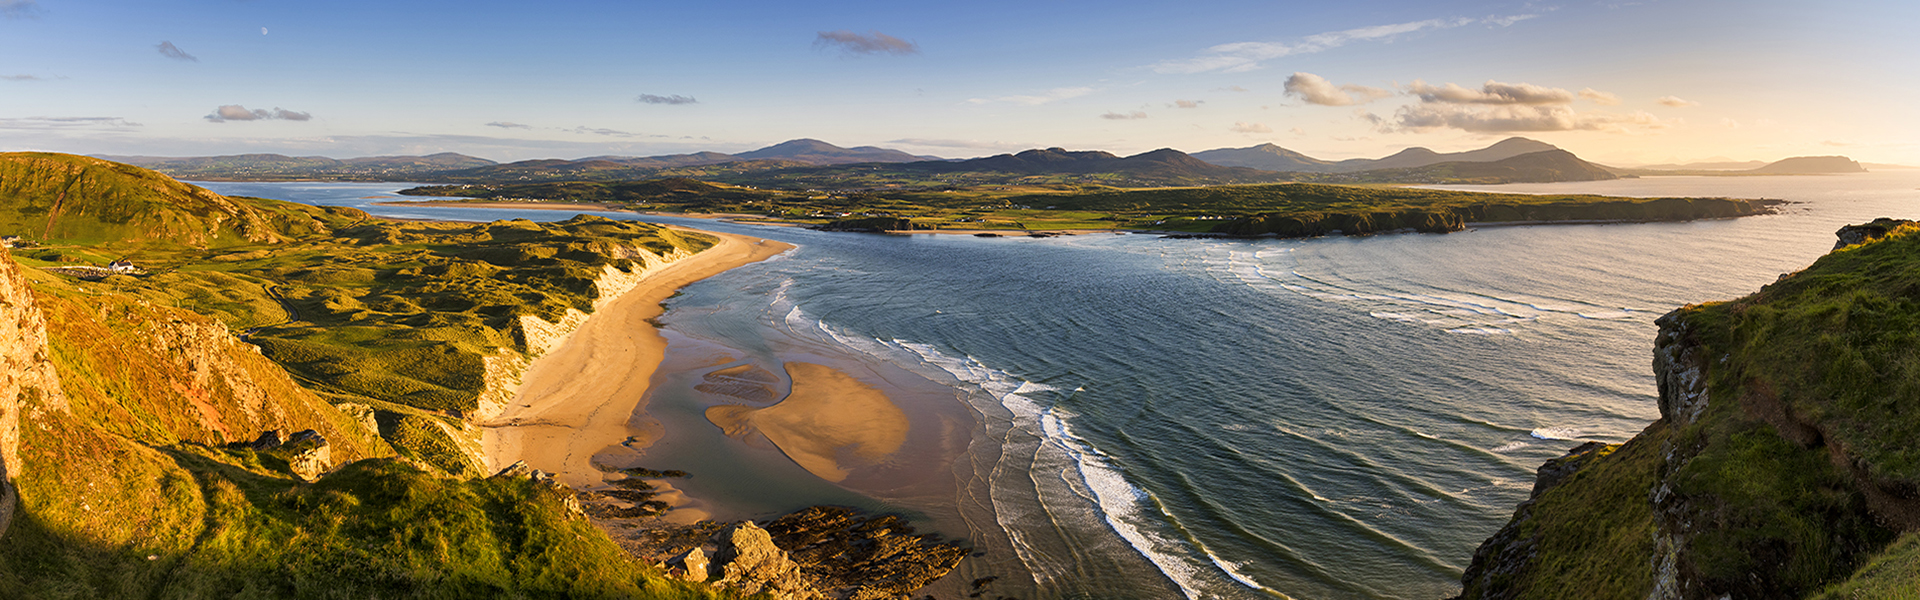 Mac Tours Ireland Five Finger Strand, Donegal